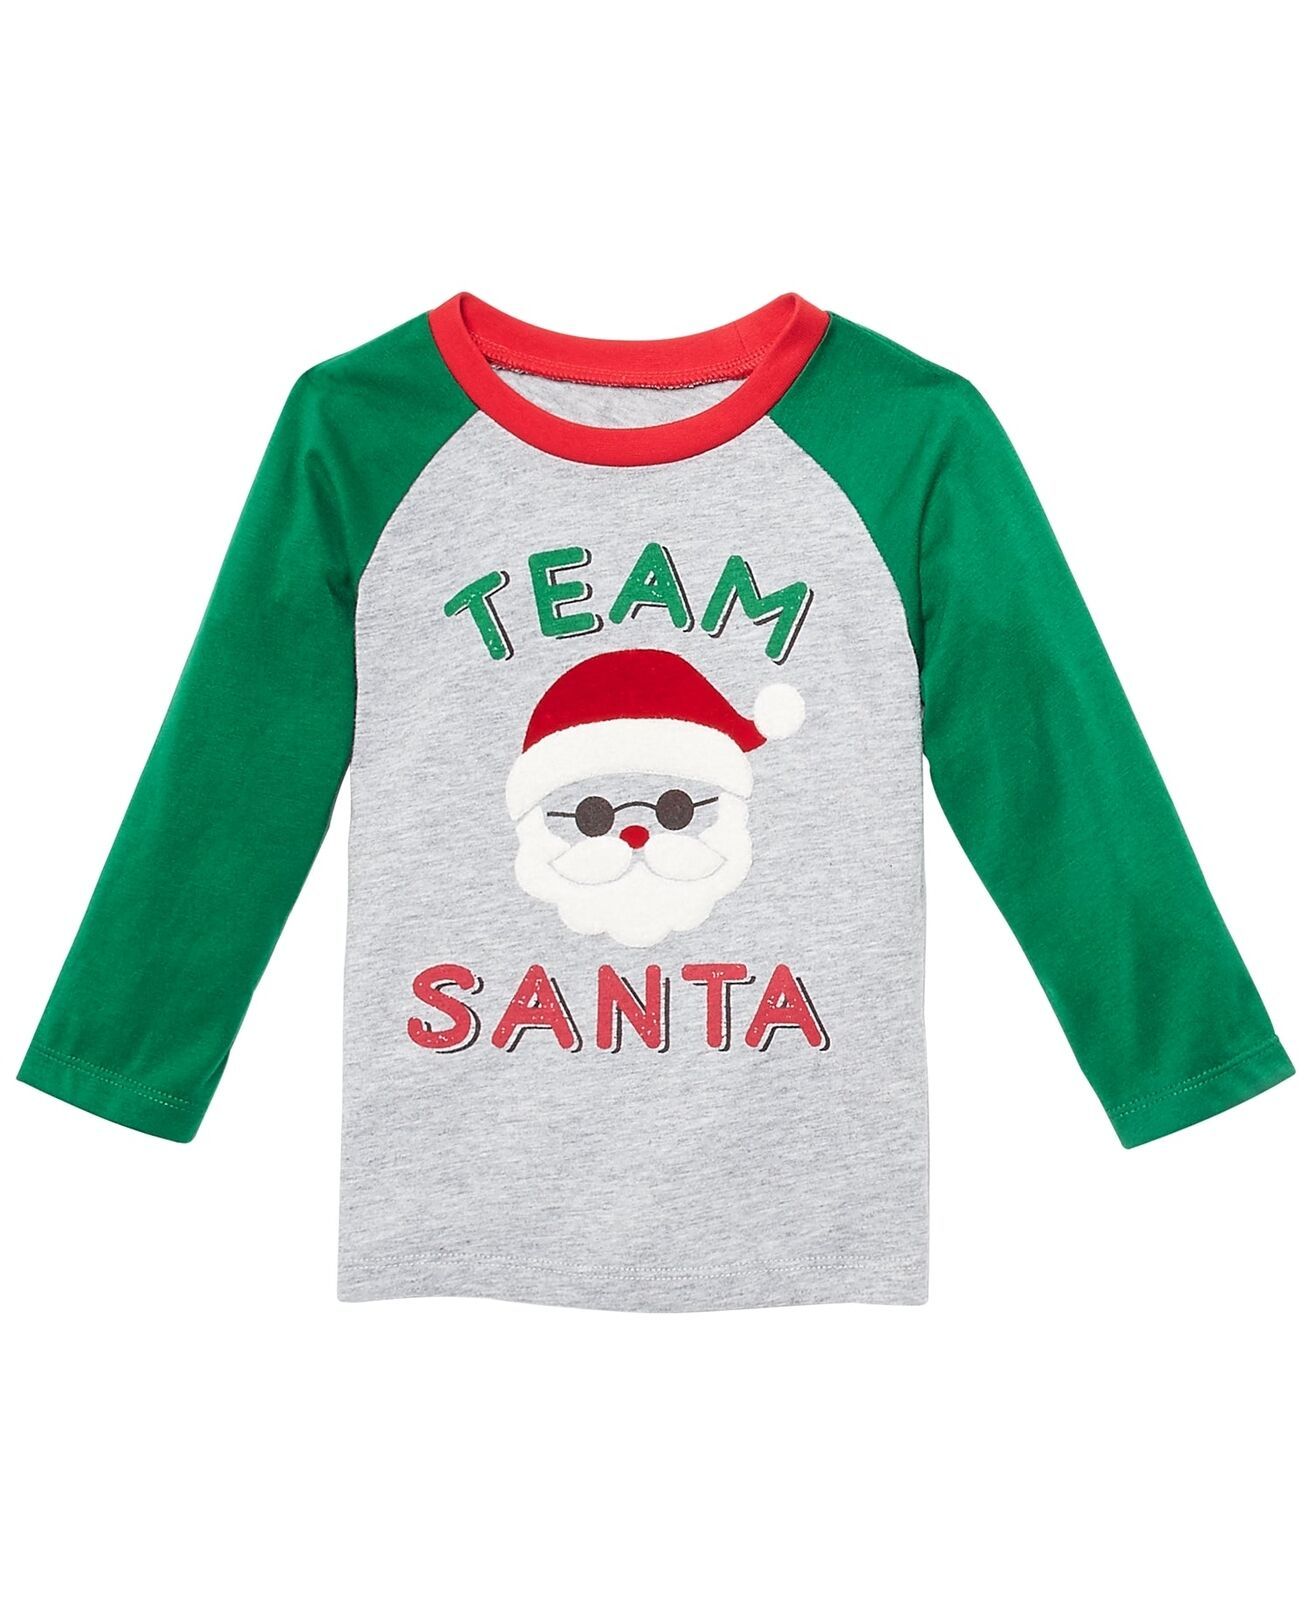 Primary image for First Impressions Infant Boys Team Santa Print T-Shirt,Shadow Heather,3-6 Months